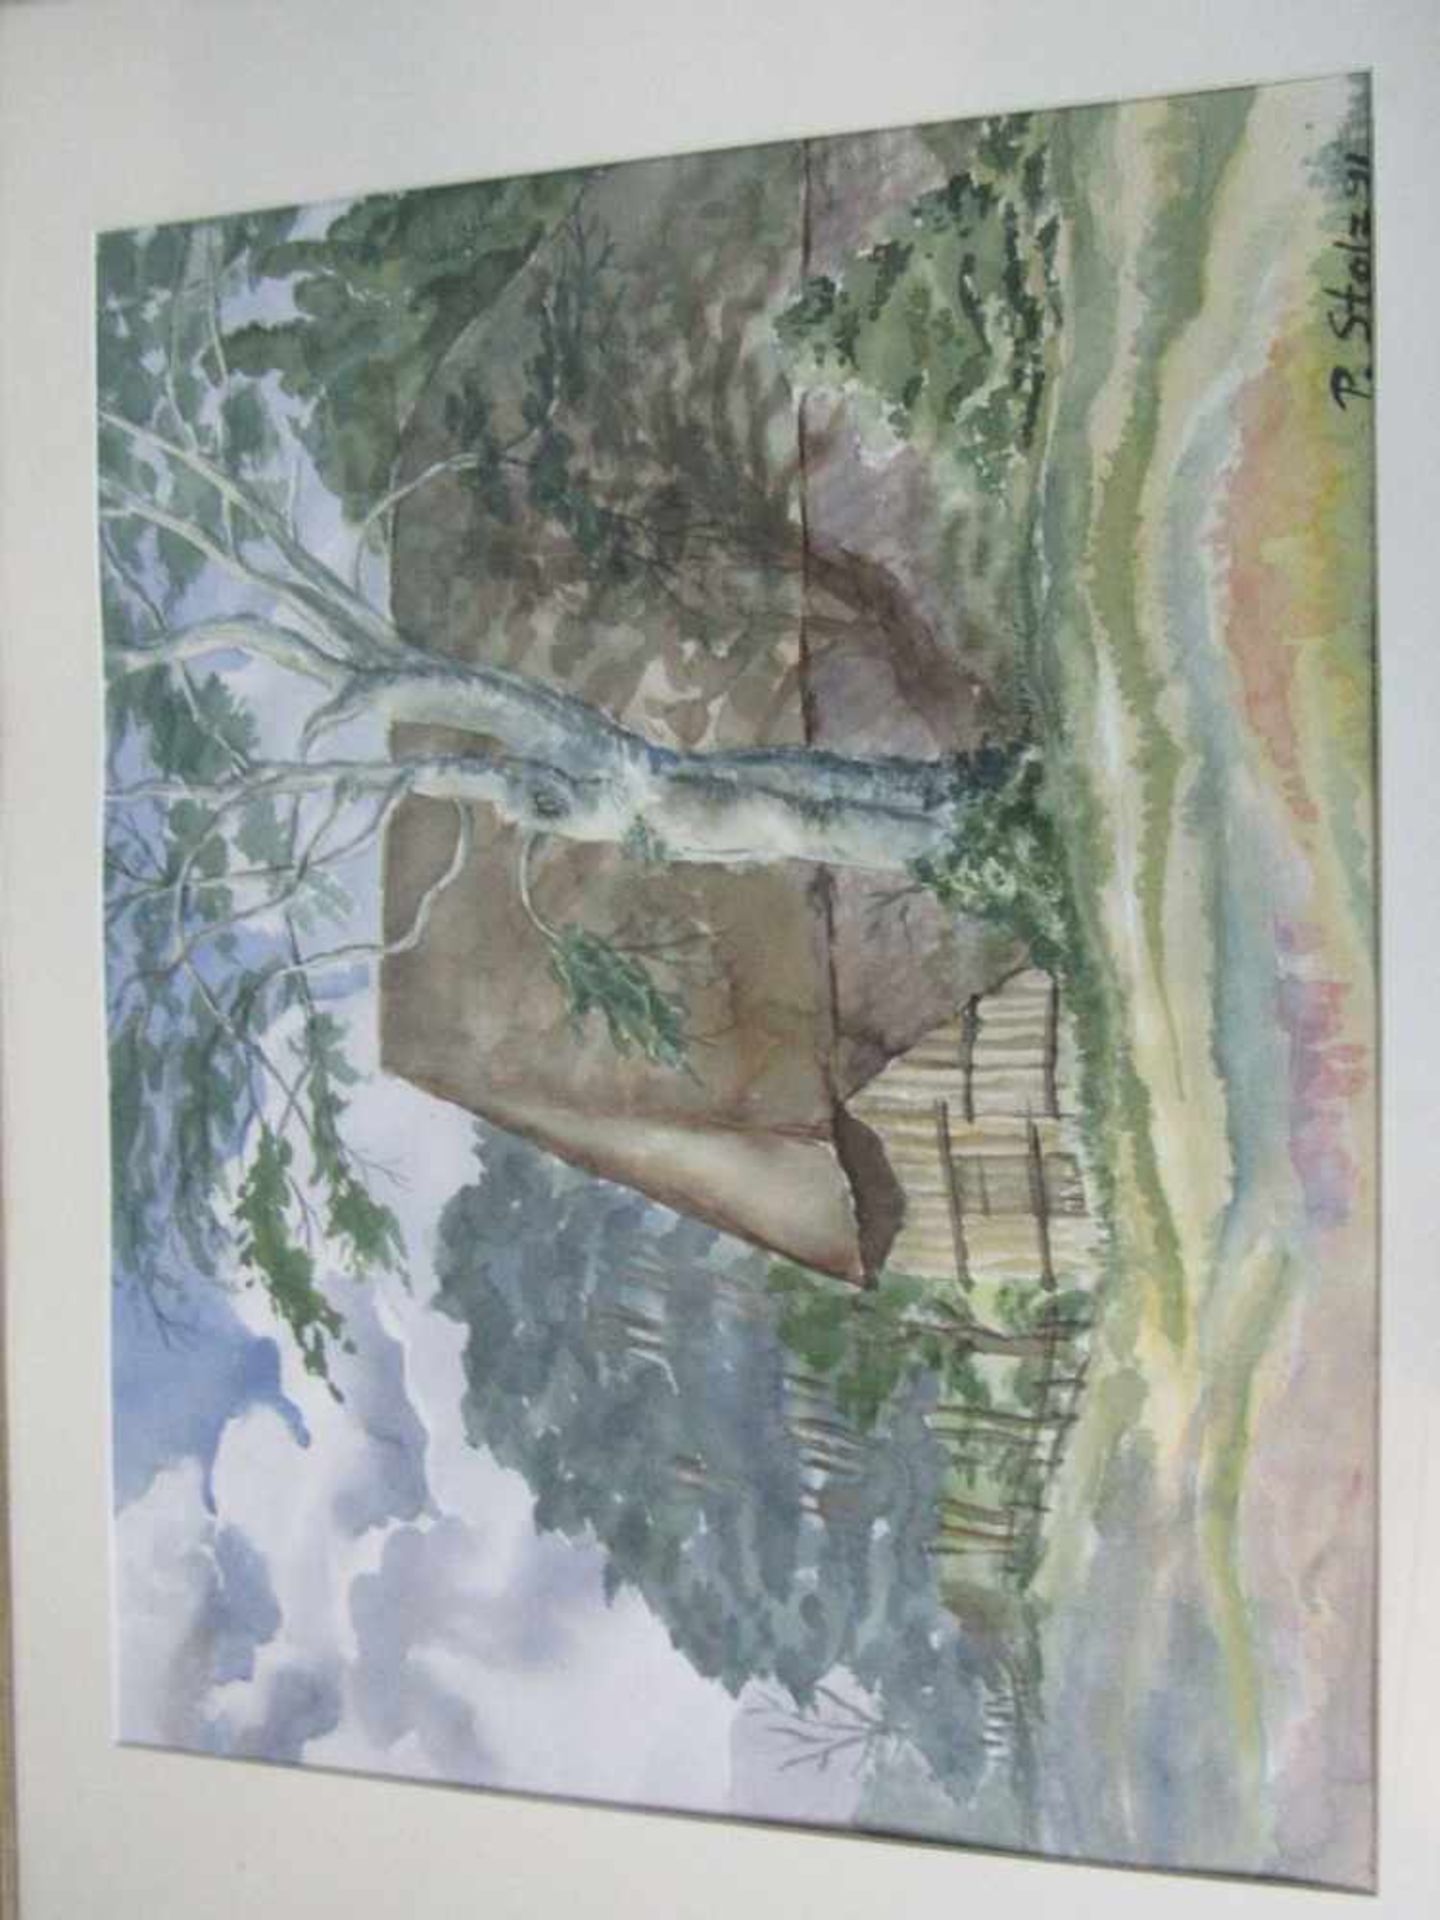 Aquarell Worpswede Stolz 88x63cm- - -20.00 % buyer's premium on the hammer price19.00 % VAT on